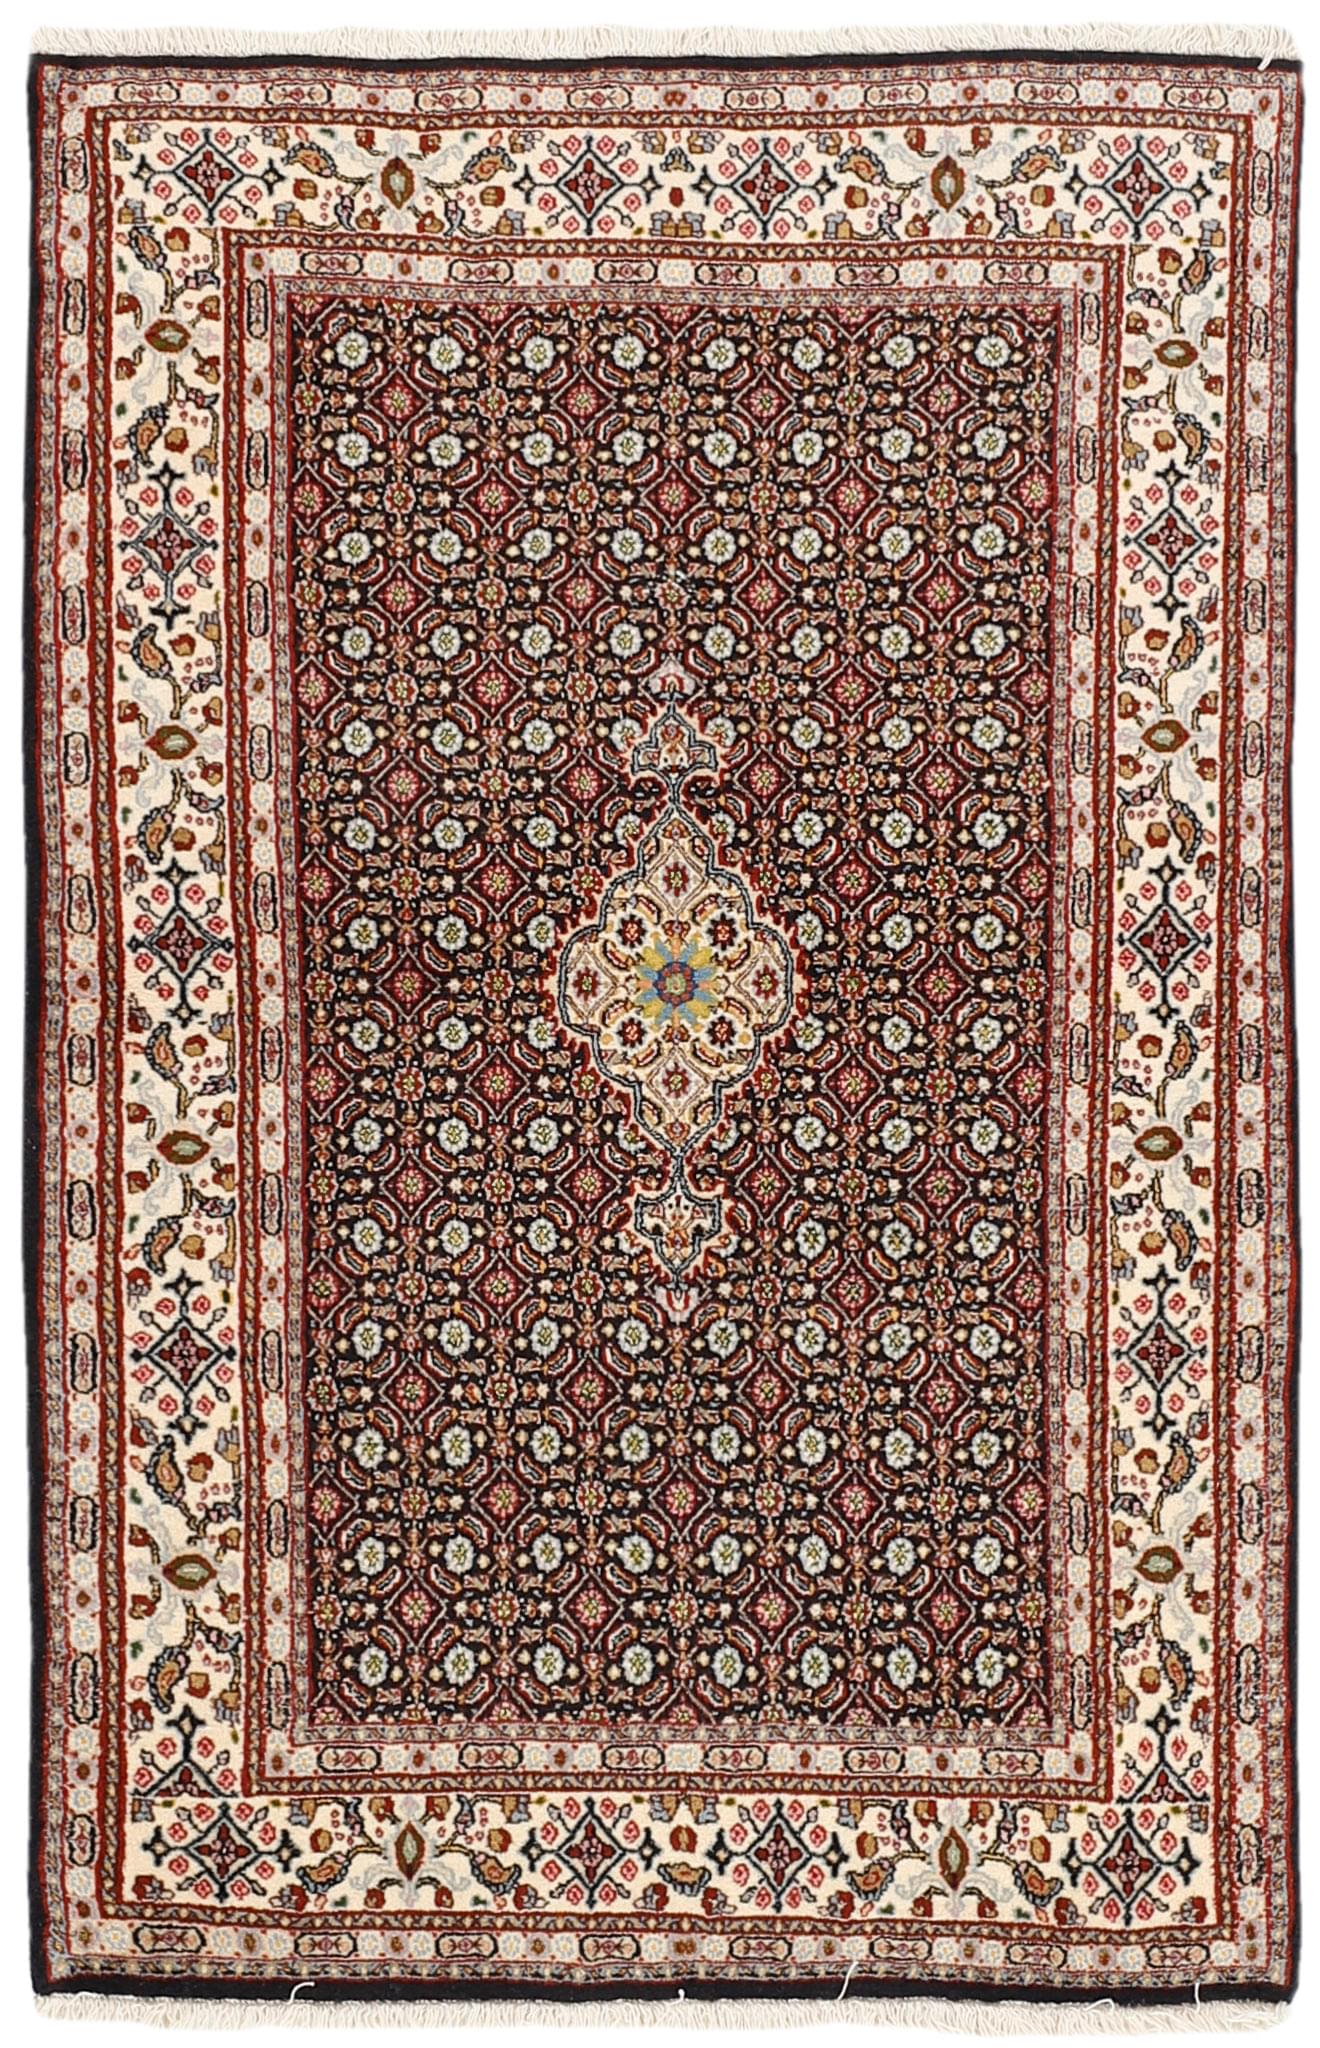 authentic persian rug with traditional floral pattern in red